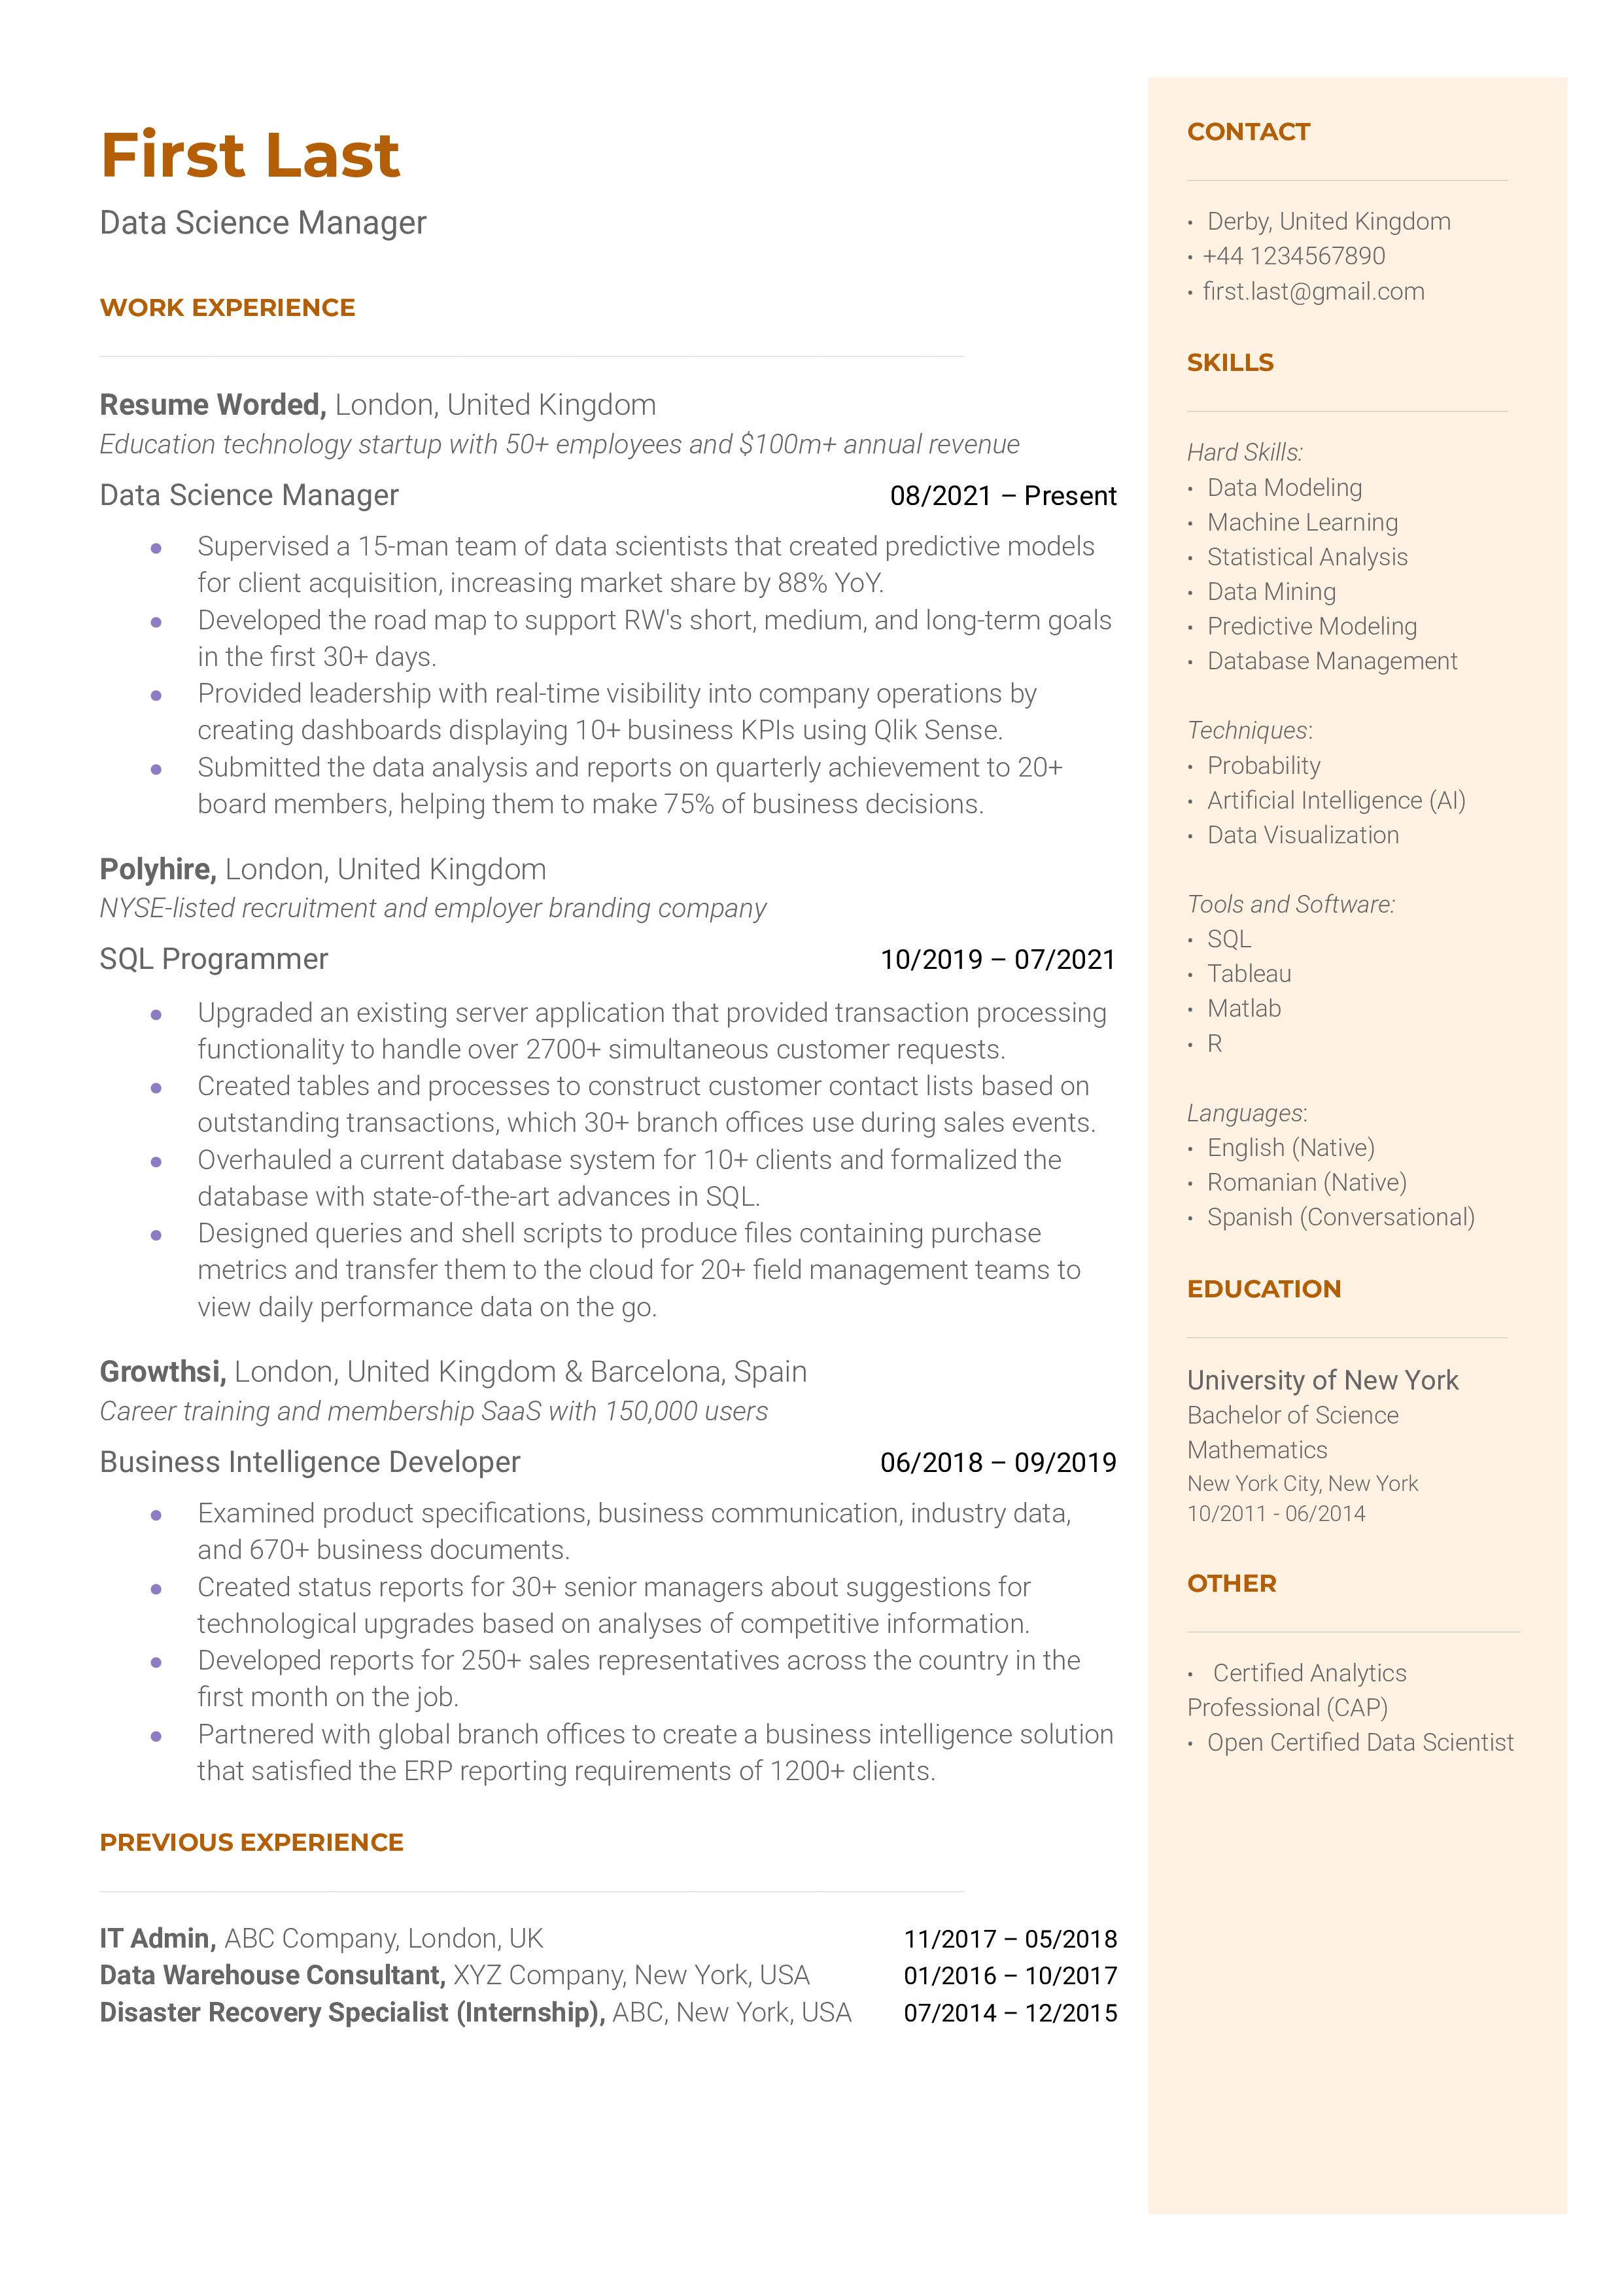 A well-structured CV tailored for the role of Data Science Manager.